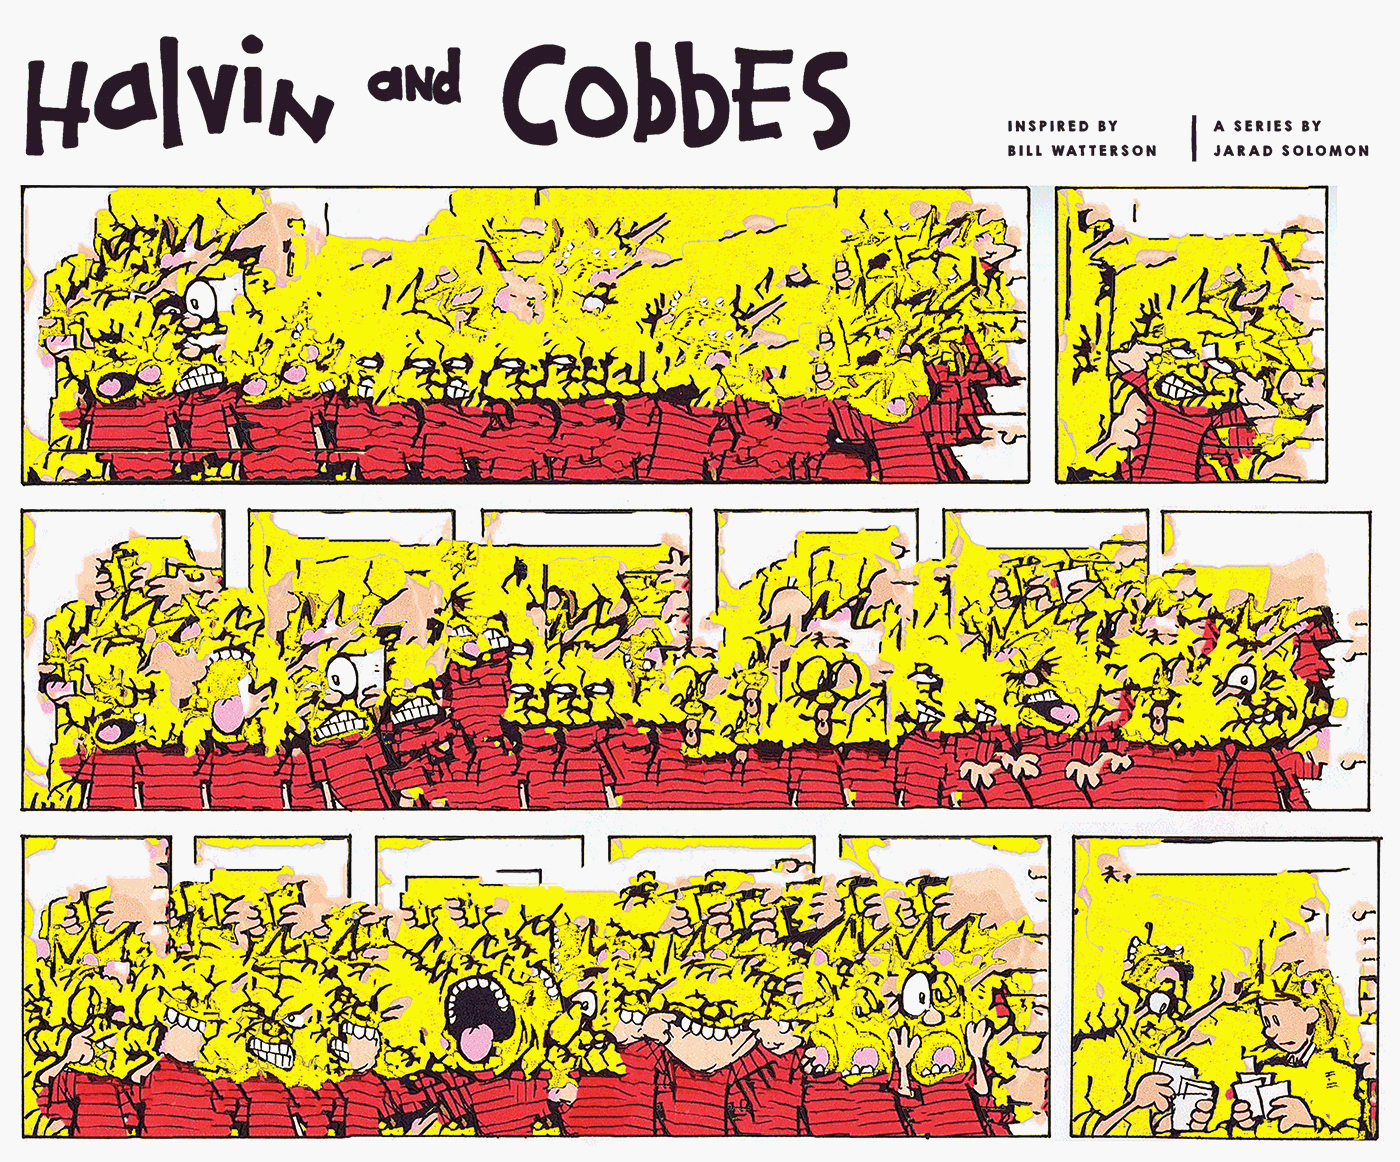 Halvin and Cobbes by Jarad Solomon